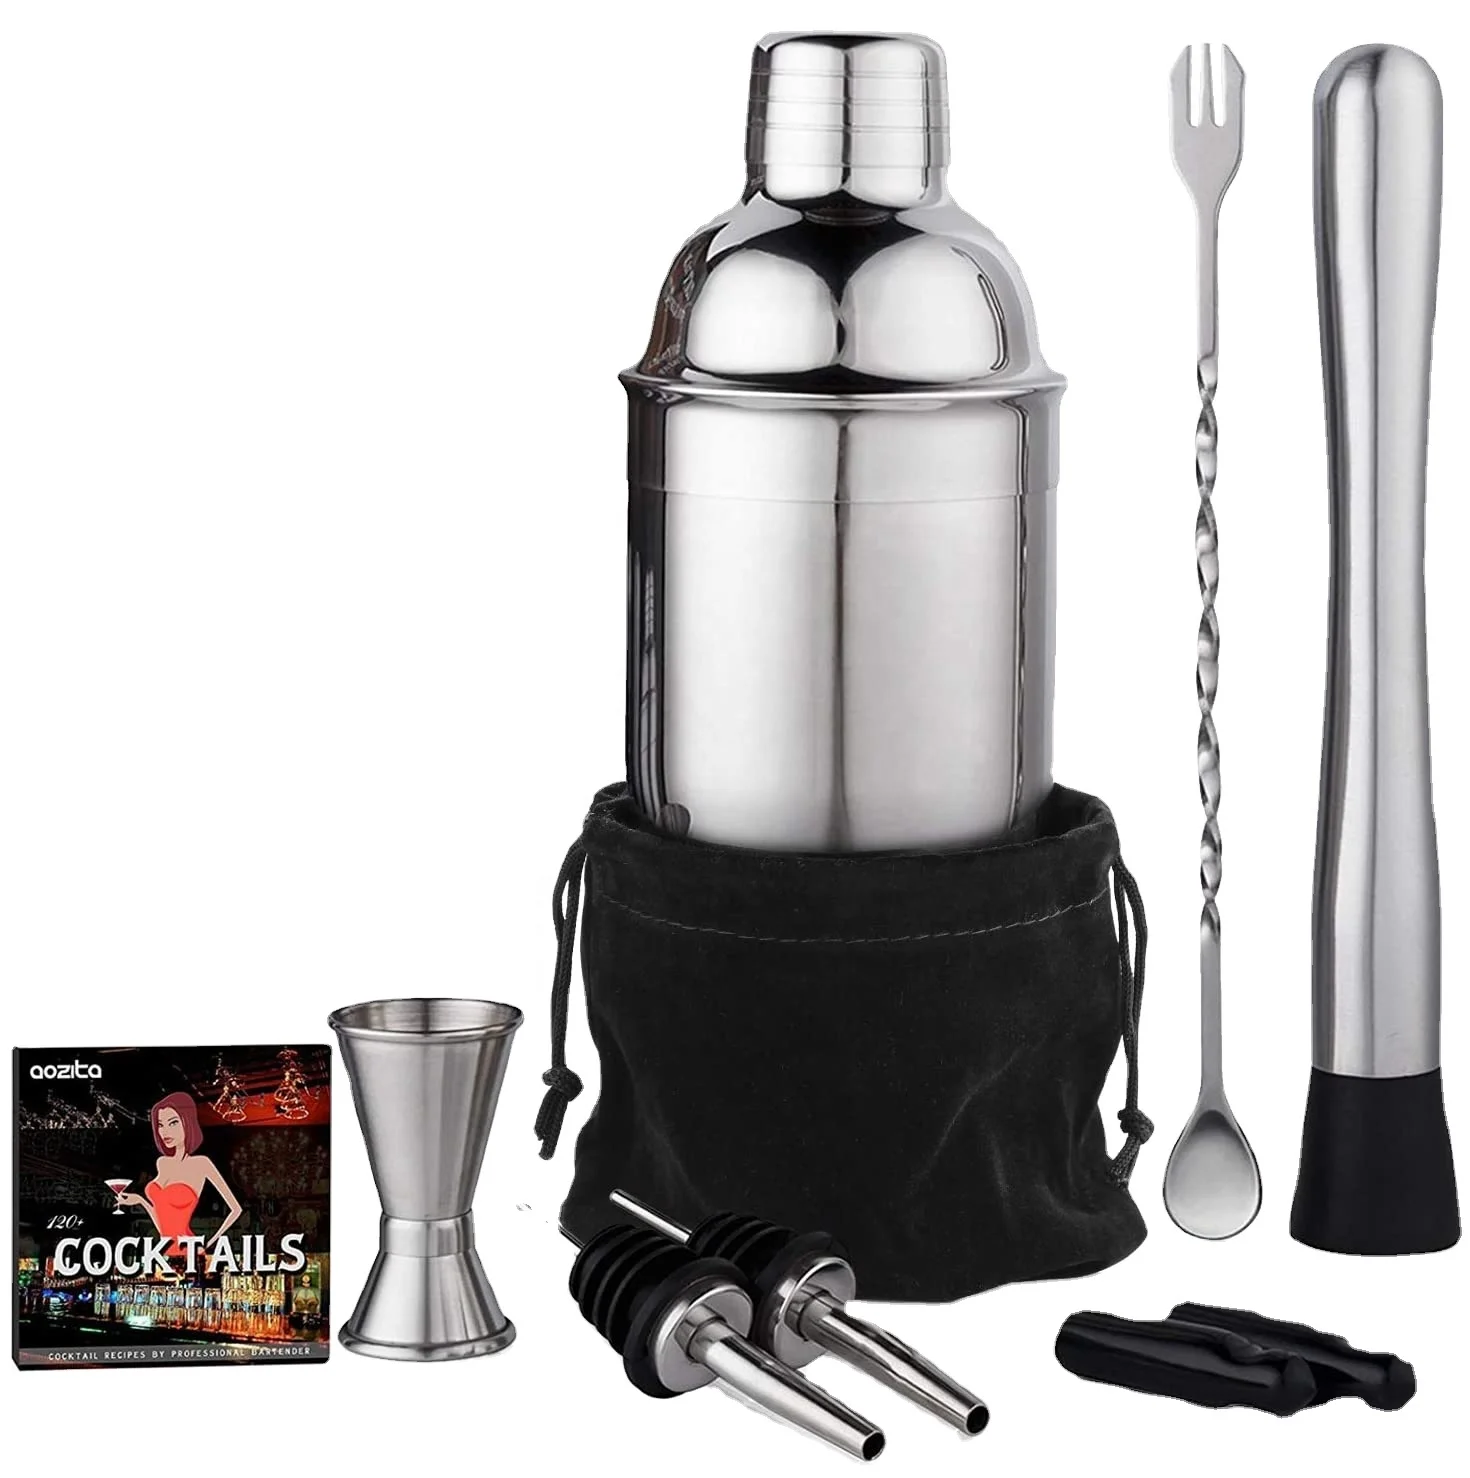 

Promotional Glossy Polished Stainless Steel Cocktail Shaker Set Professional Bar Tools 24 Oz Cocktail Shaker Set